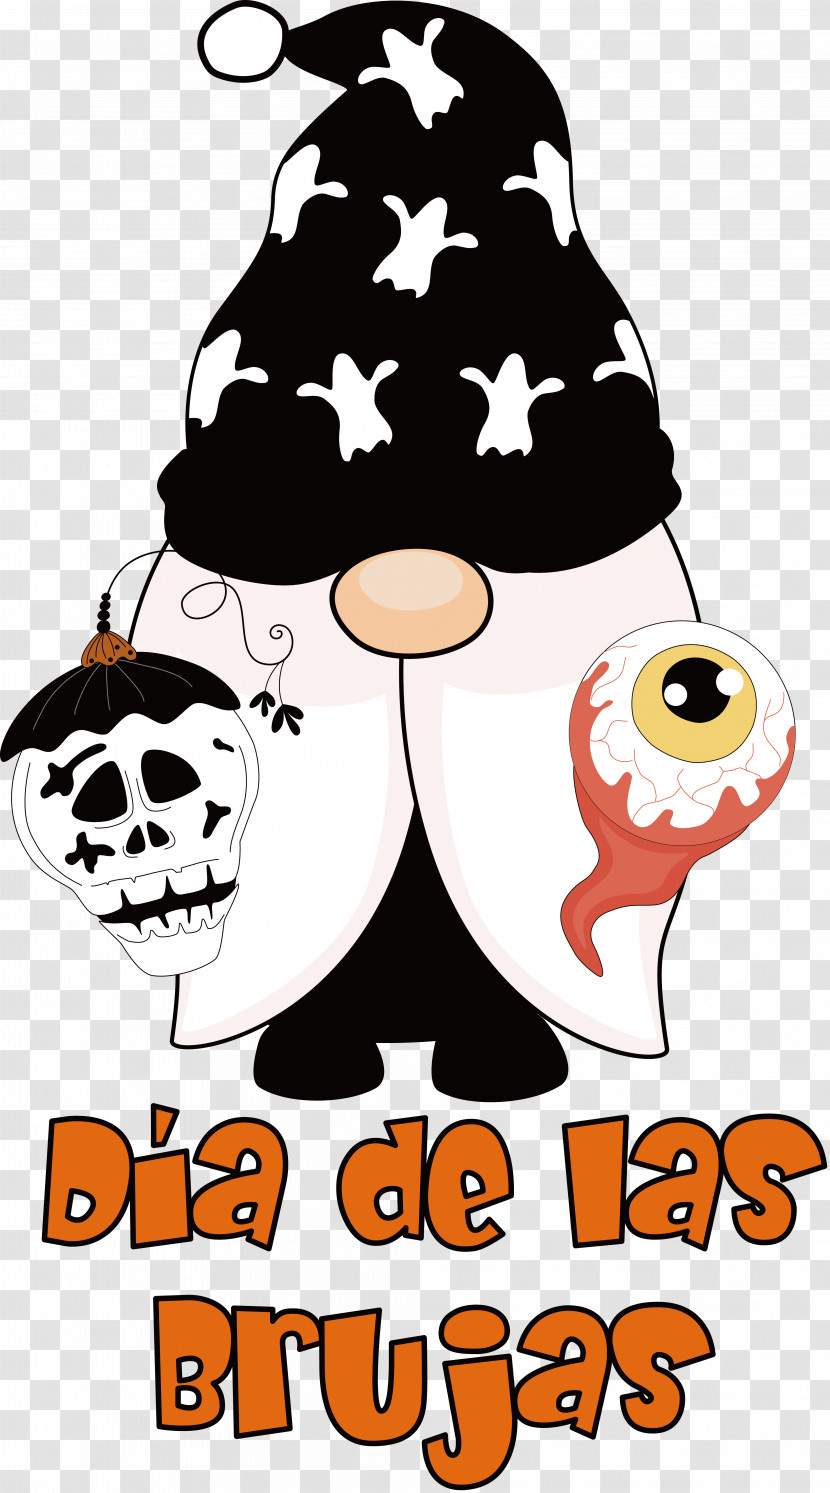 Halloween Party Transparent PNG